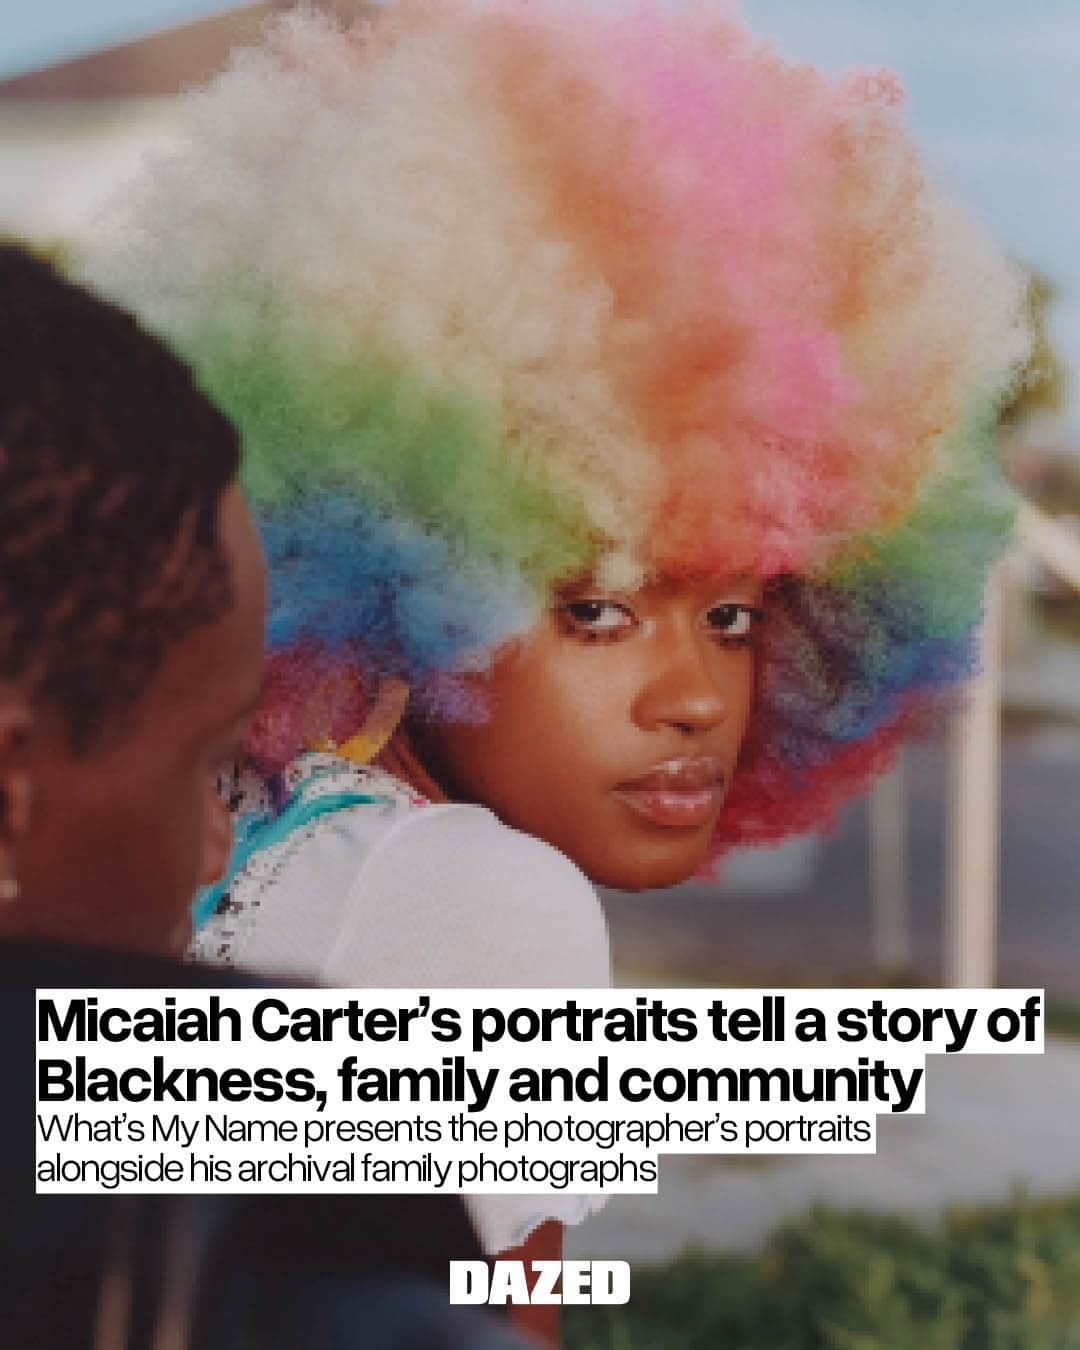 Dazed Magazineのインスタグラム：「@micaiahcarter’s latest photo book, What’s My Name by @prestel_publishing is inspired by his family and draws on the wealth of family photograph albums that have fascinated Carter since childhood. ⁠ ⁠ "My family album has inspired me since I was a child," Carter tells Dazed. "I really wanted to make something that expresses those serendipitous moments and the juxtaposition of the influence it had on my own works."⁠ ⁠ In among his own work – which blends fine art, street photography and fashion photography – the Brooklyn and Los Angeles-based image-maker has interspersed the book with photographs from his family archive. ⁠ ⁠ Pictures taken by his father over several decades sit side-by-side with Carter’s contemporary portraits.⁠ ⁠ The result is a beautiful meditation on family, love, Blackness, memory, style, and American life, in which the past and the present occupy the same shared space on the page. ⁠ ⁠ What’s My Name invites us to draw comparisons and create connections between generations, while compelling us to think about our own past – the stories we preserve that make our histories legible to us and the loved ones who’ve shaped the unique culture of our own families.⁠ ⁠ Read the full interview through the link in our bio 🔗⁠ ⁠ 📷 @micaiahcarter⁠ ✍️ @ohnoitsemilyd」